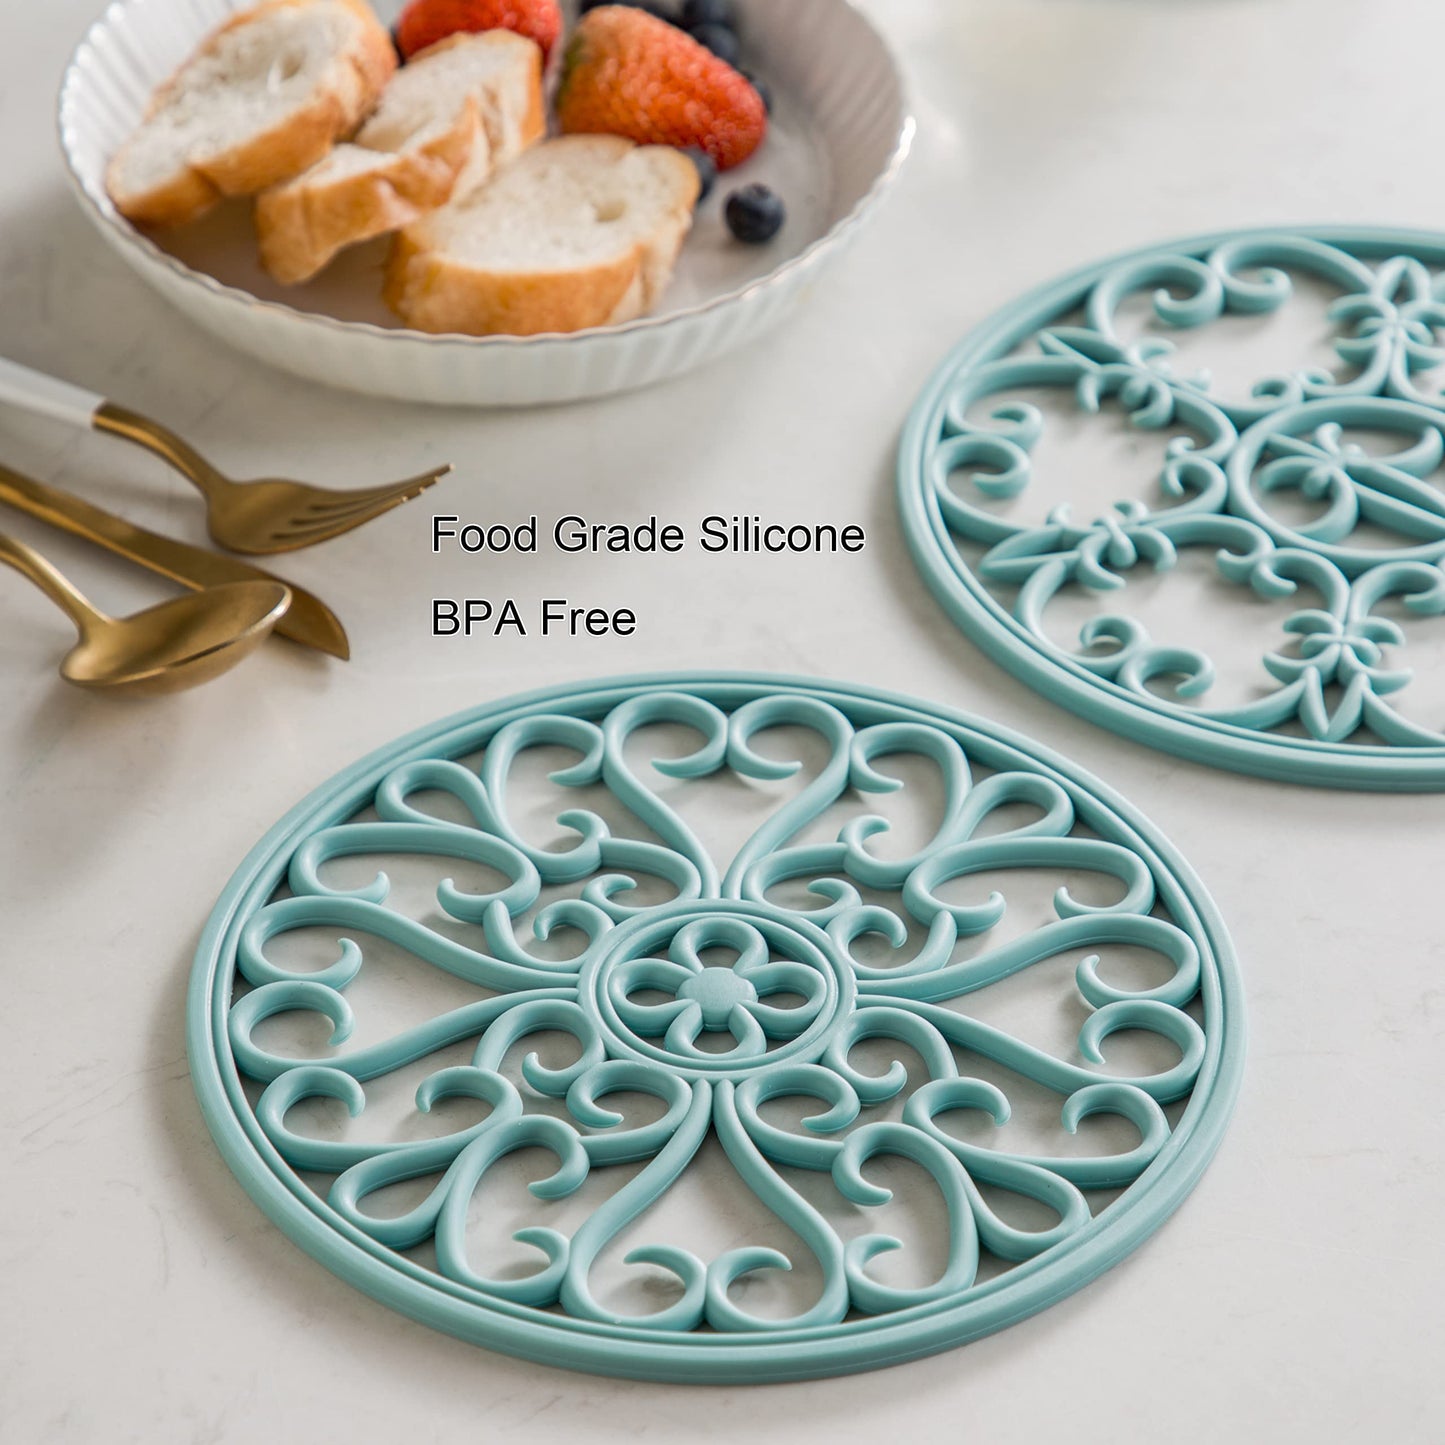 Silicone Trivet Mat - Non-Slip & Heat Resistant Kitchen Hot Pads for Countertops & Table - Kitchen Trivets for Hot Dishes & Cookware - Hot Pot Holder for Pots & Pans - Turquoise,Set of 3